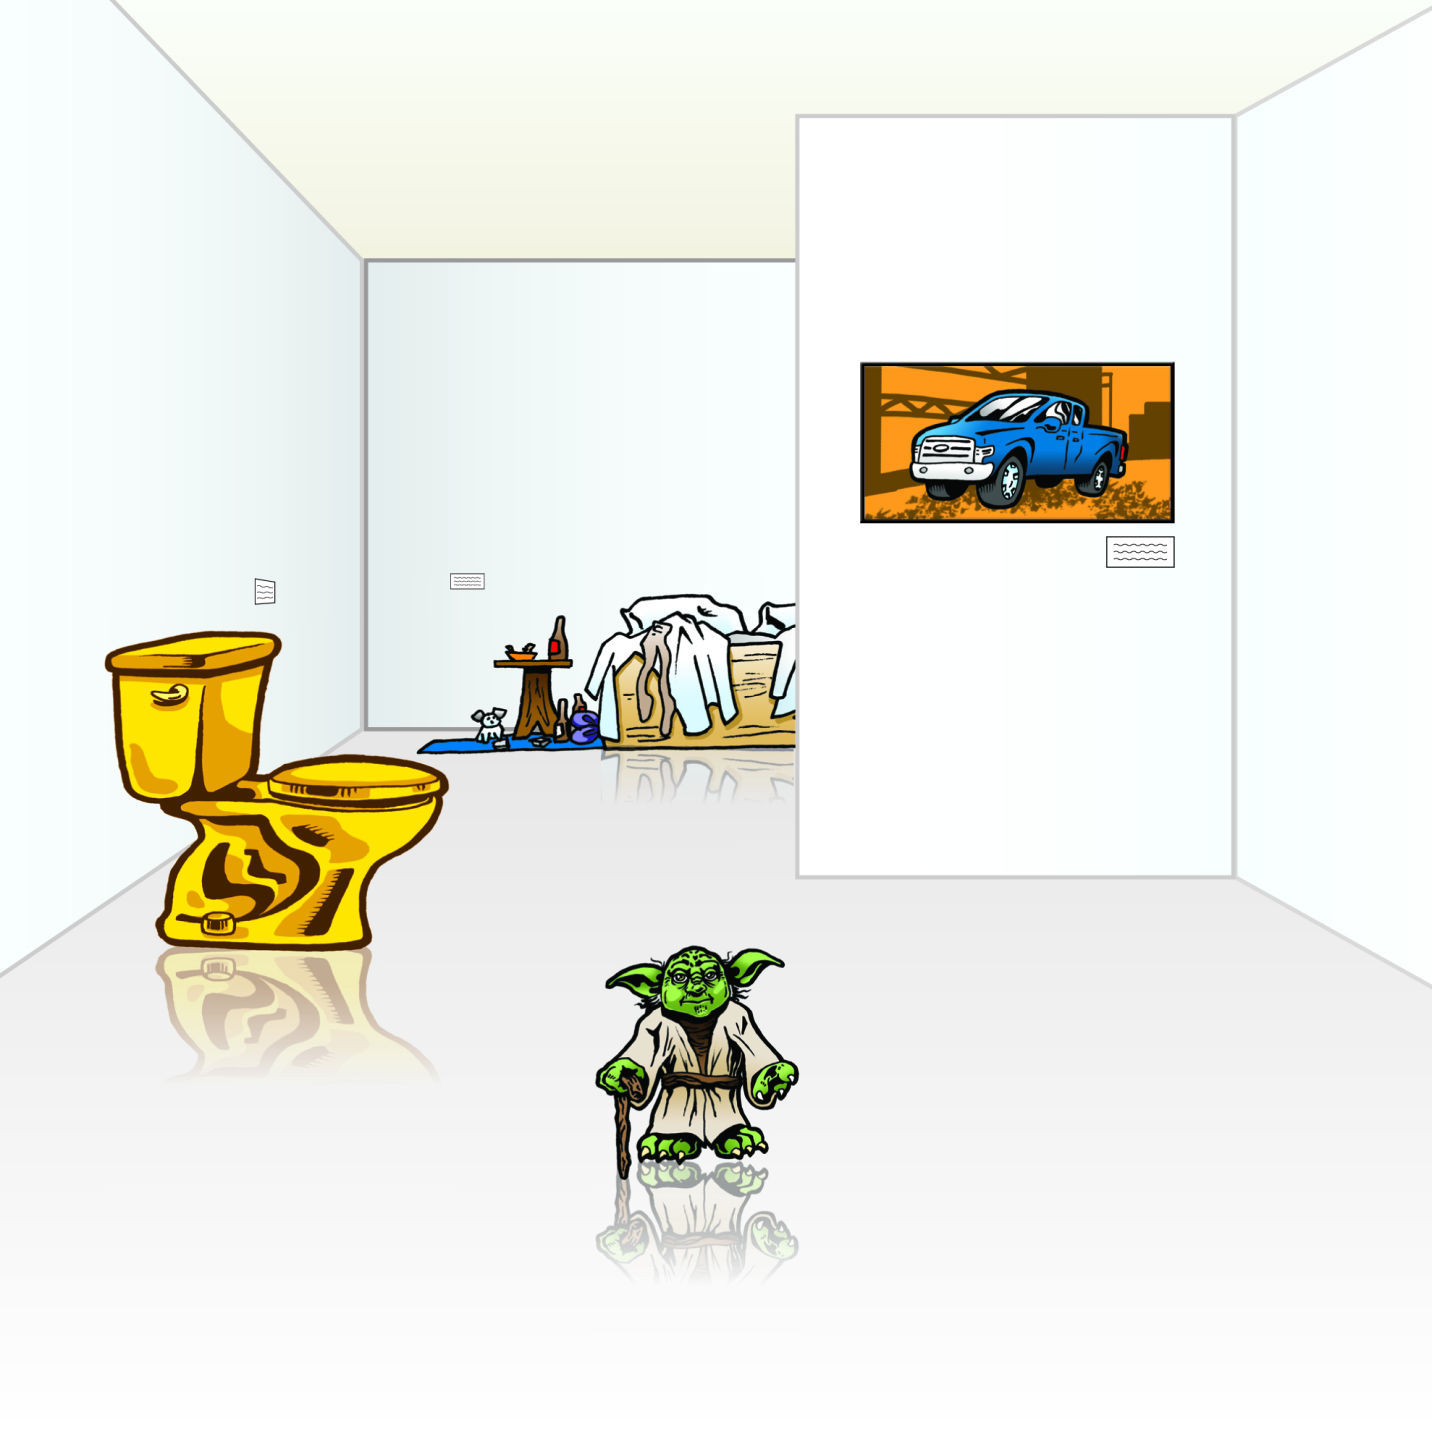  The art world pulls another juvenile stunt: Toilets and their contents